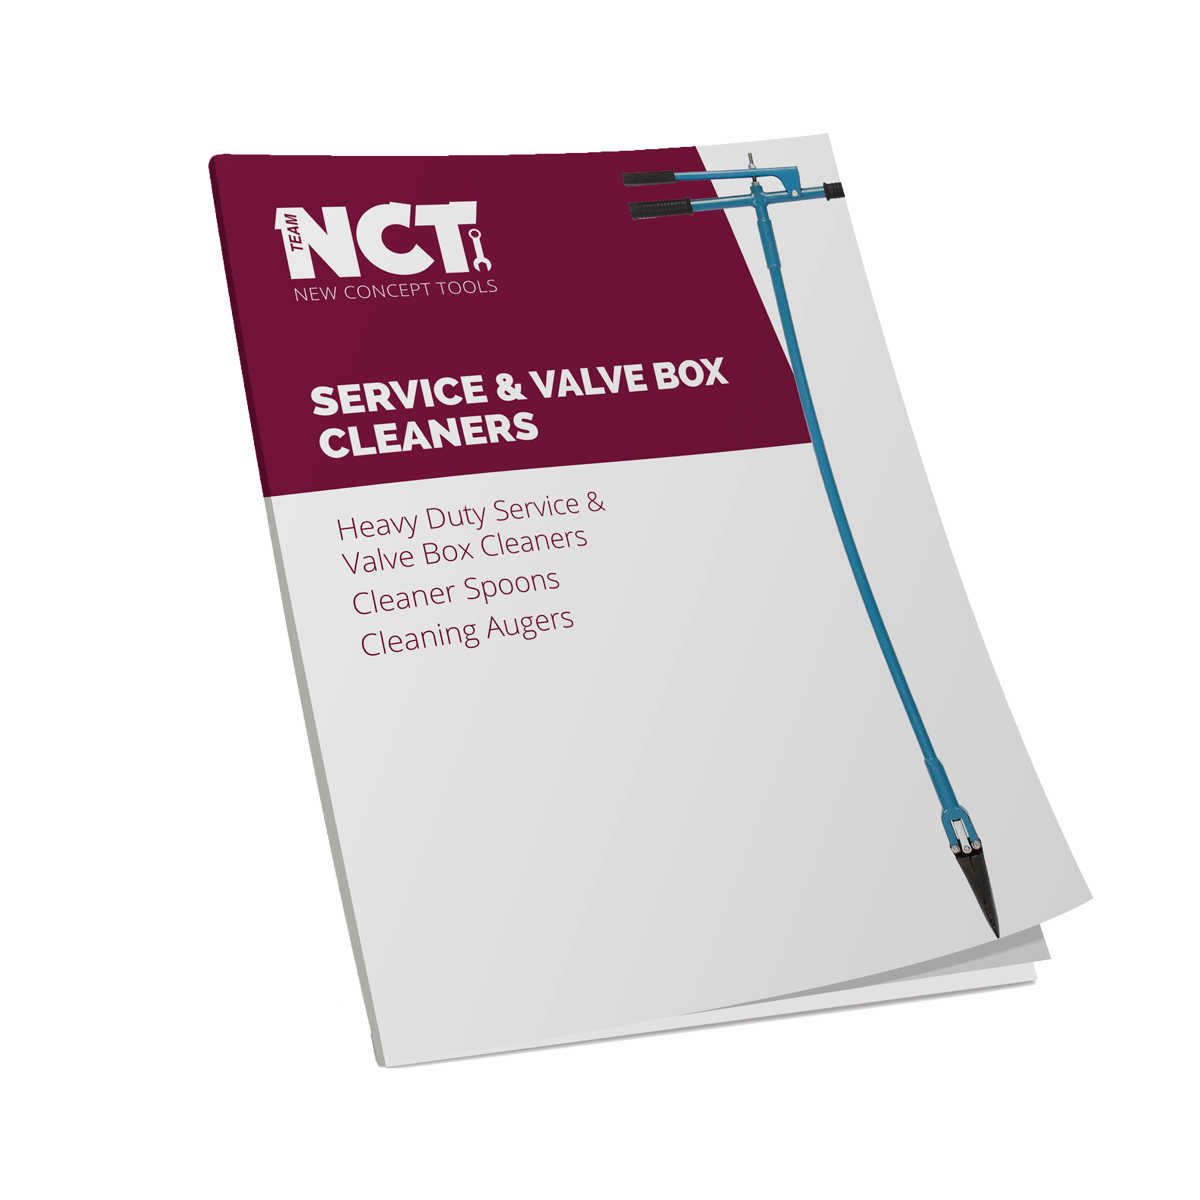 service-and-valve-box-cleaners-book-template.png